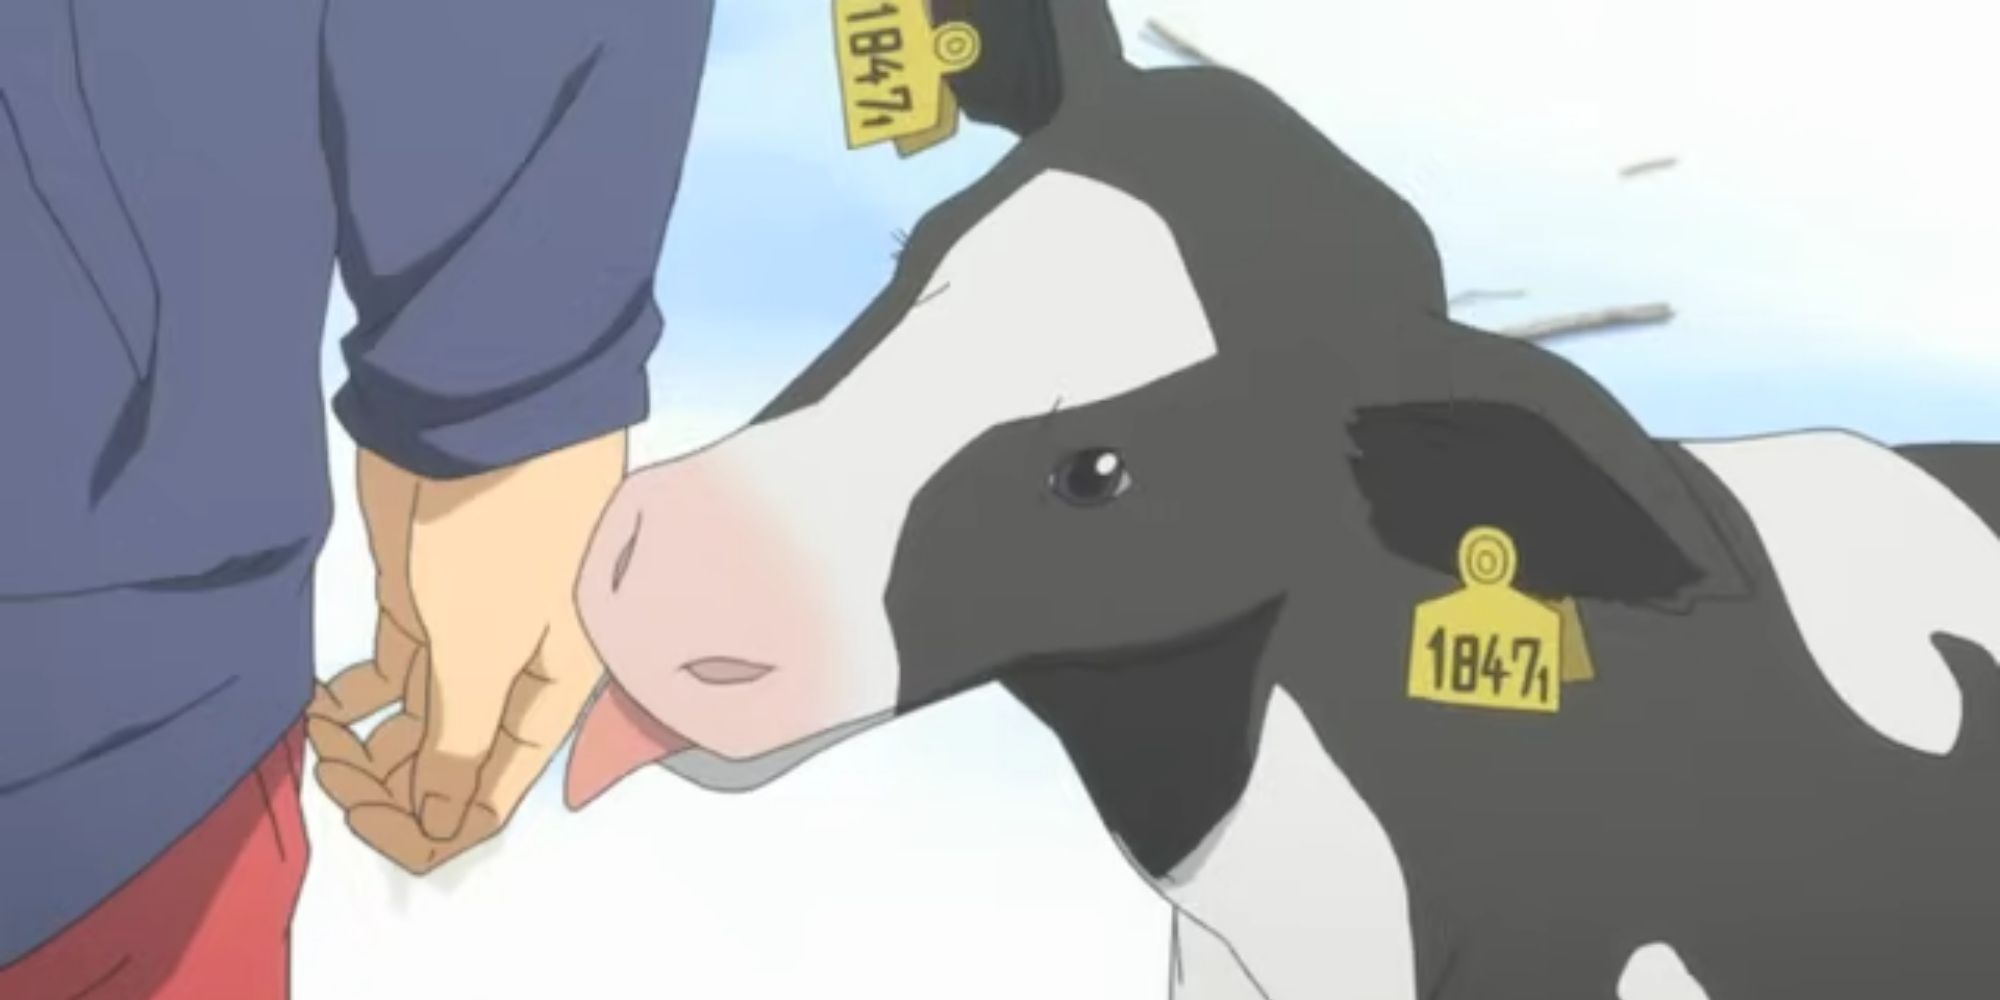 A cow licking someone's hand in Silver Spoon